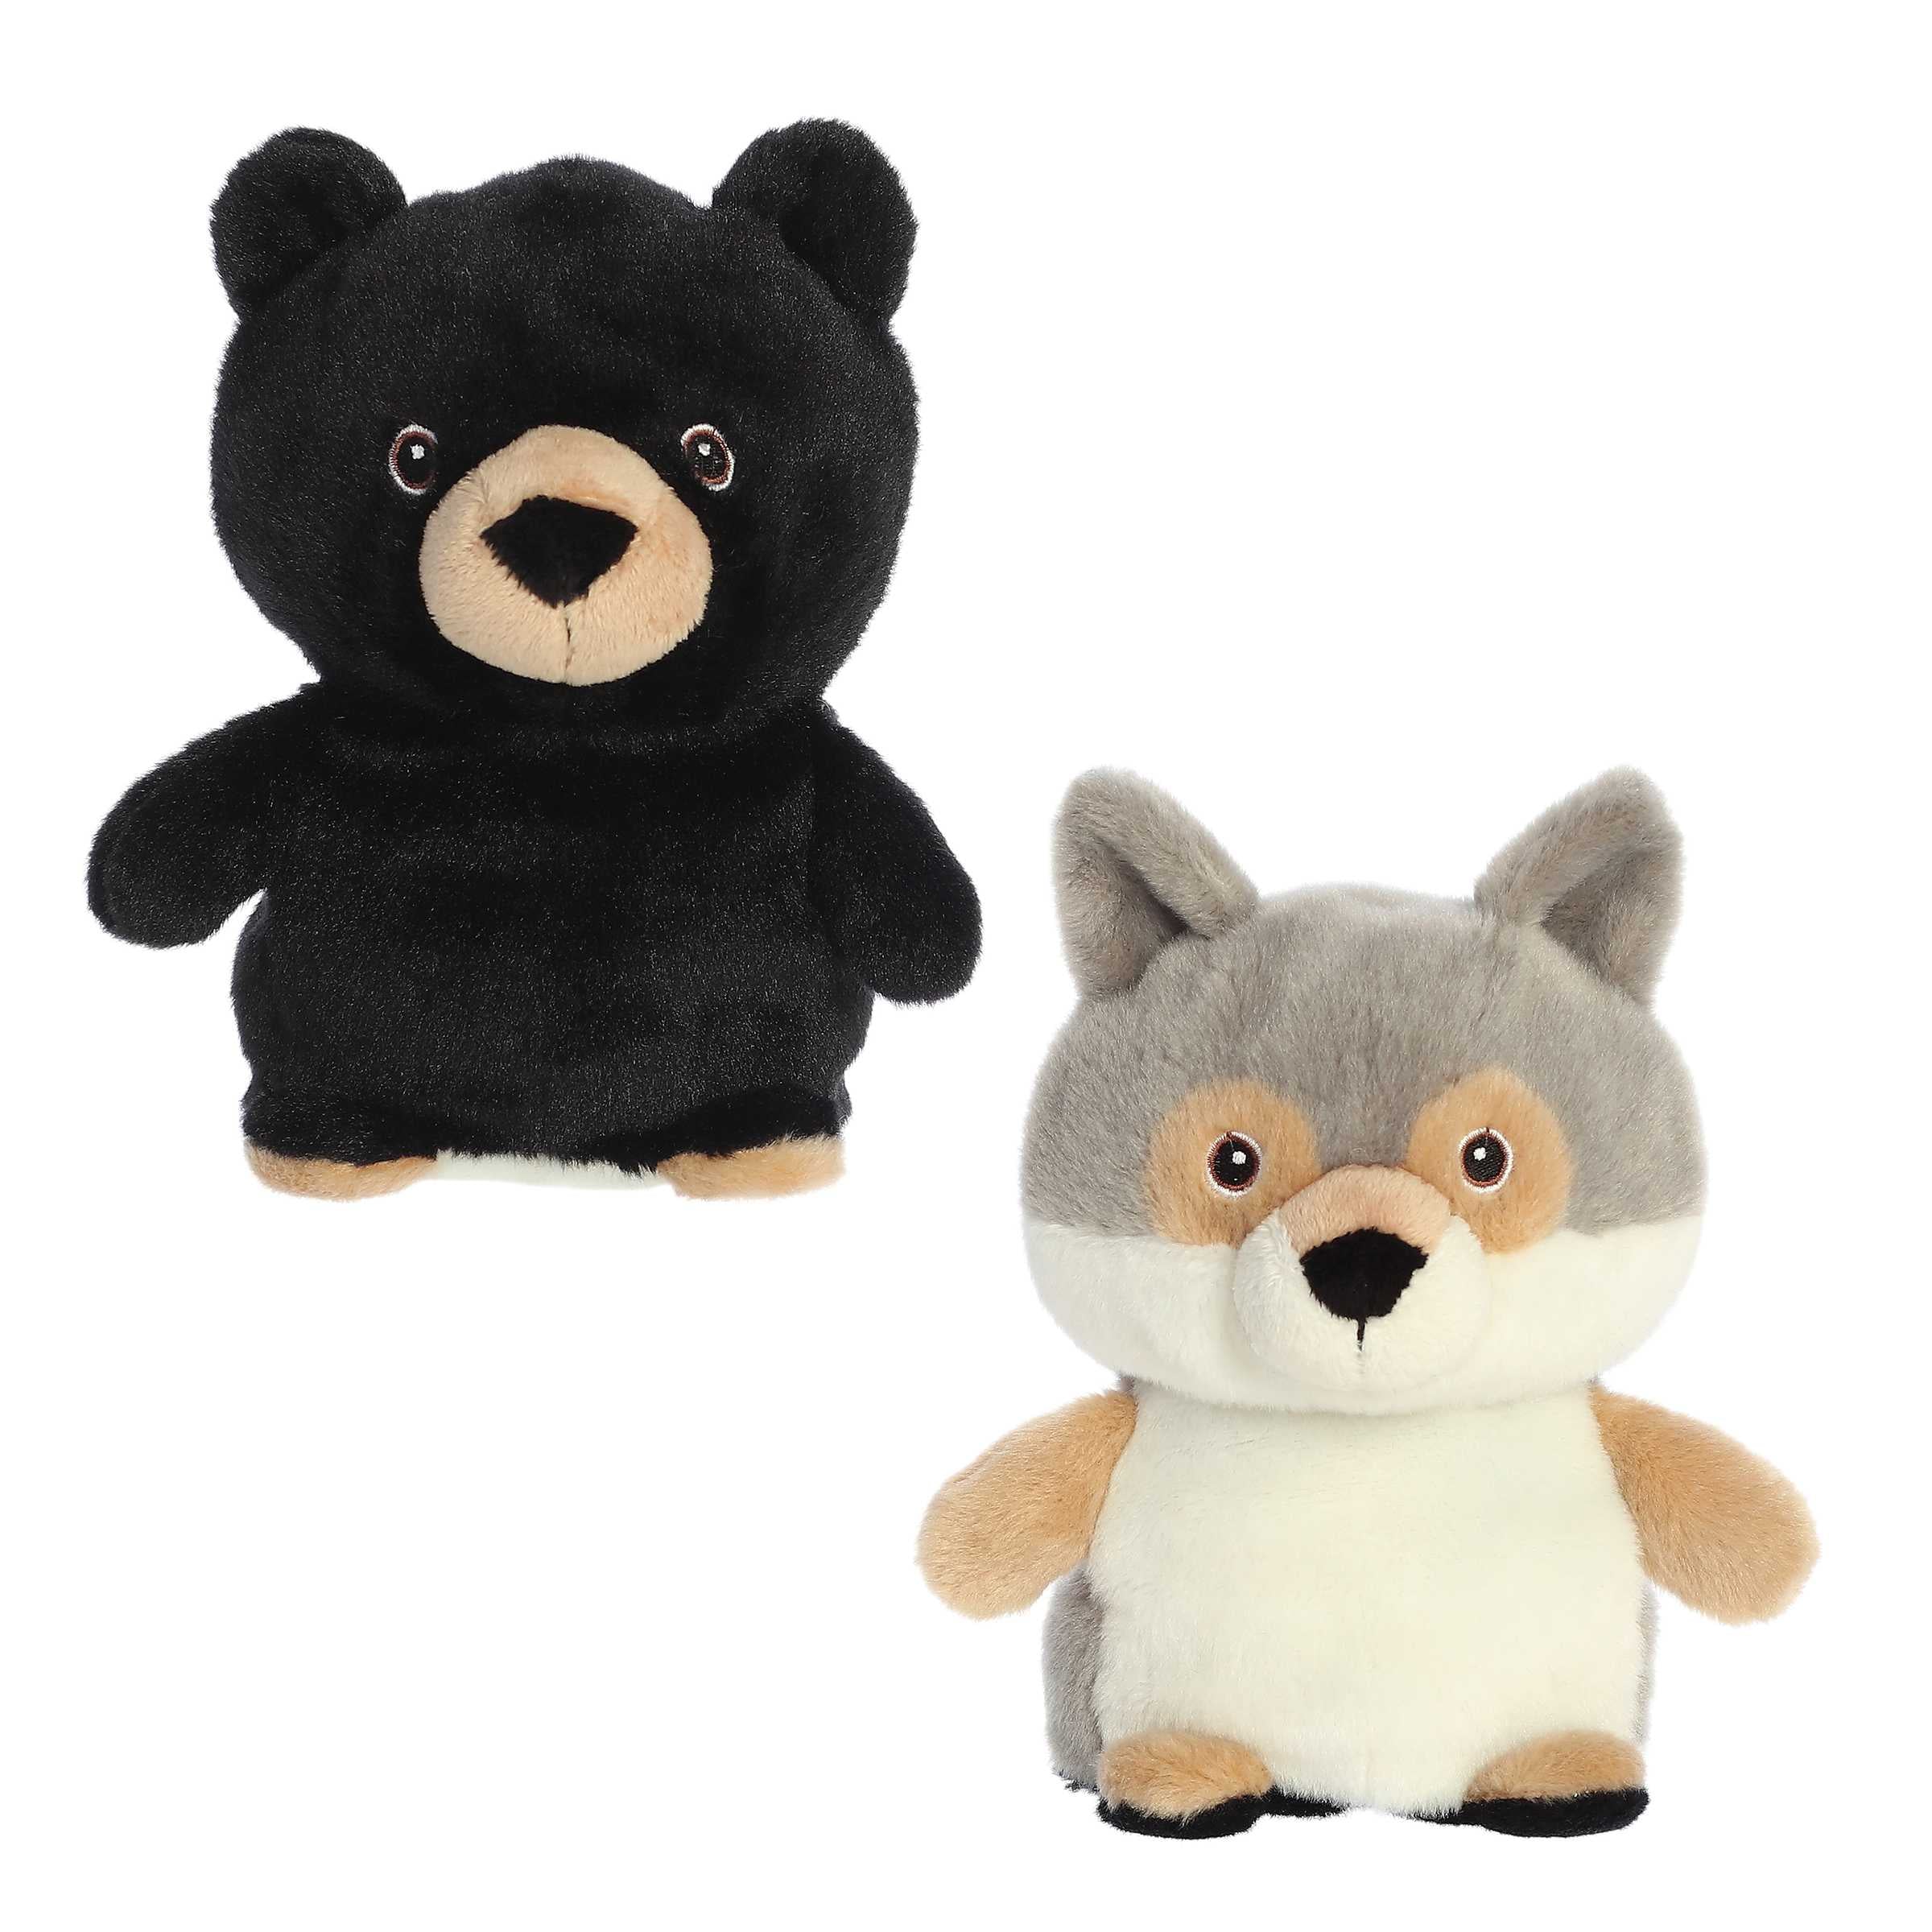 A Reversible Eco Bear plush and Wolf Plush in one, an environmentally friendly toy teaching wildlife conservation by Aurora